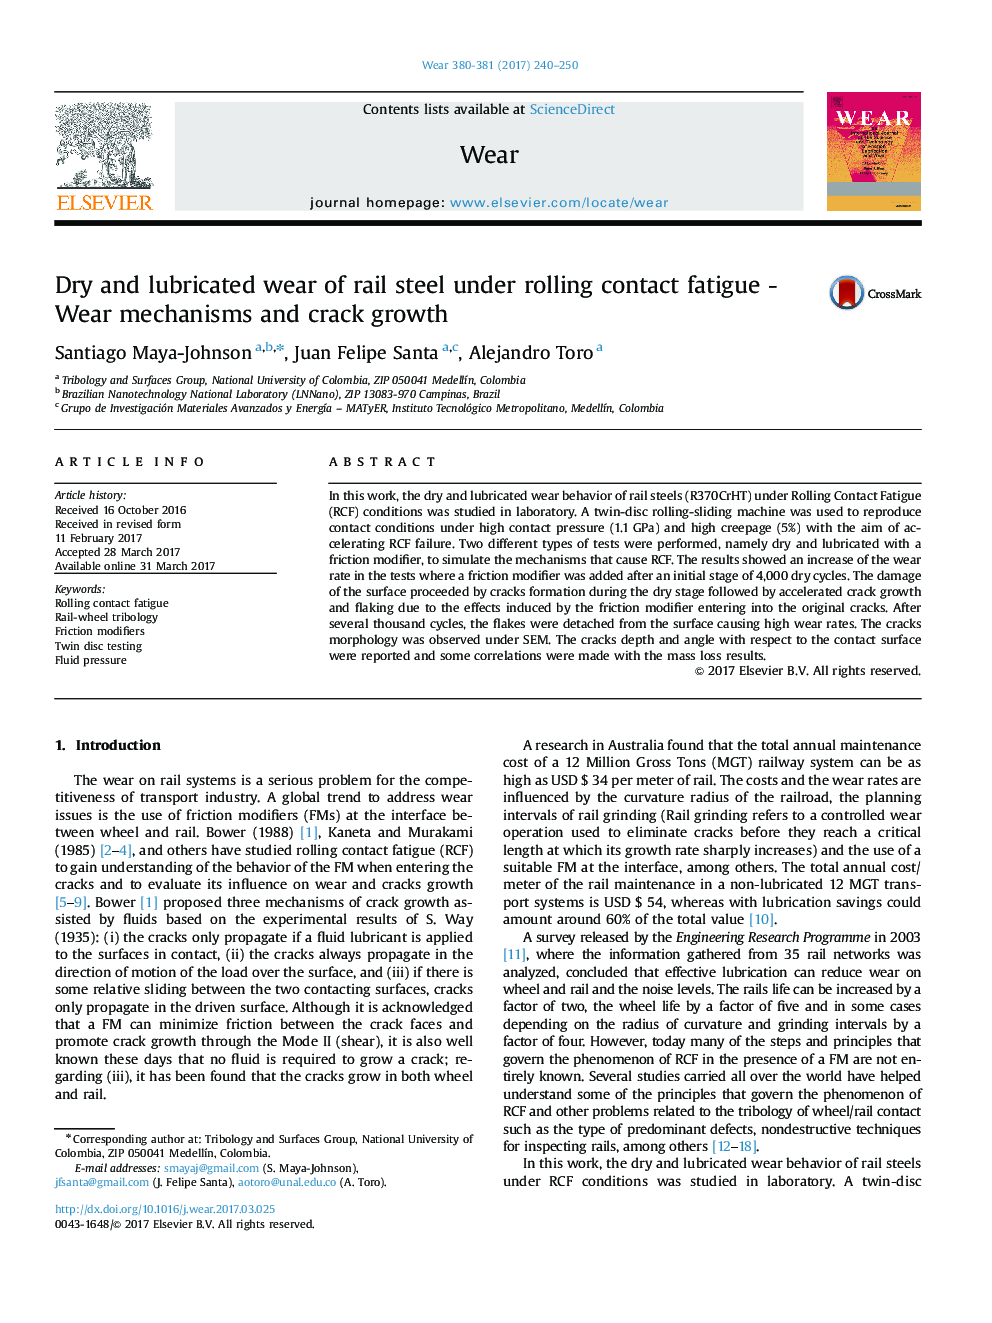 Dry and lubricated wear of rail steel under rolling contact fatigue - Wear mechanisms and crack growth